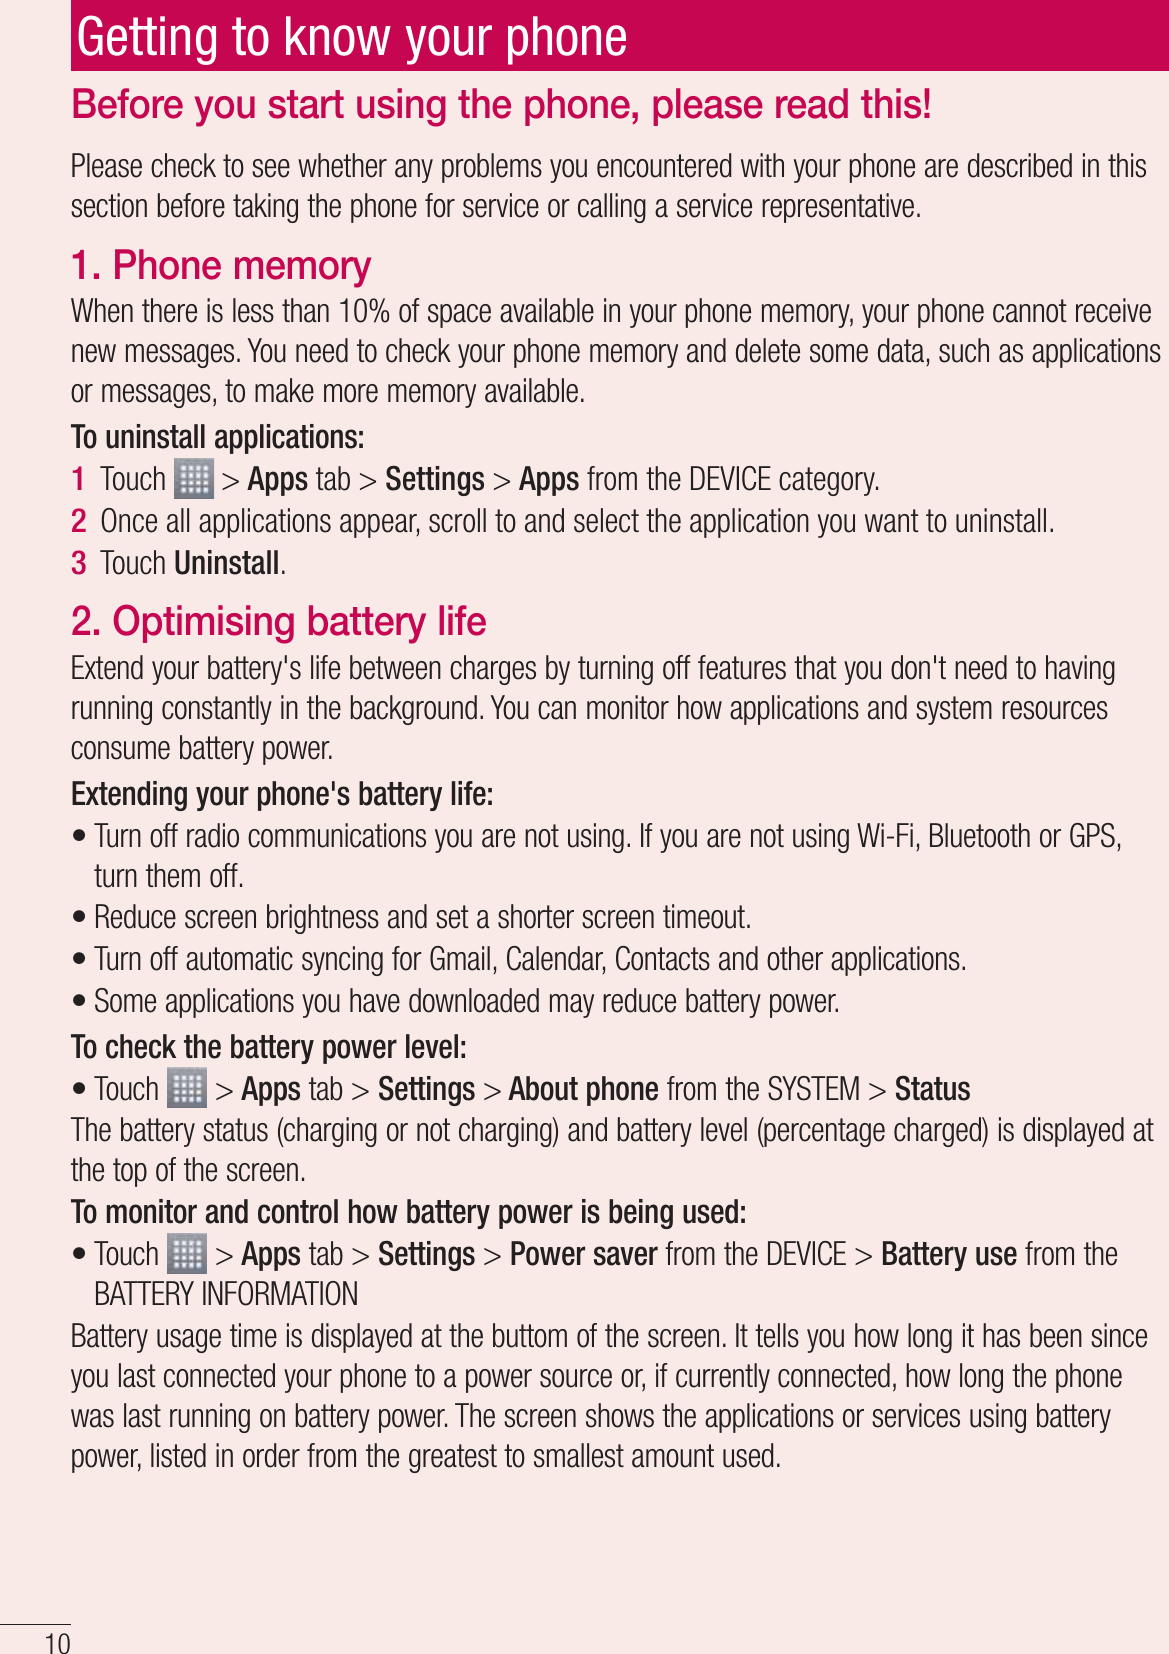 10Please check to see whether any problems you encountered with your phone are described in this section before taking the phone for service or calling a service representative.1. Phone memory When there is less than 10% of space available in your phone memory, your phone cannot receive new messages. You need to check your phone memory and delete some data, such as applications or messages, to make more memory available.To uninstall applications:Touch   &gt; Apps tab &gt; Settings &gt; Apps from the DEVICE category.Once all applications appear, scroll to and select the application you want to uninstall.Touch Uninstall.2. Optimising battery lifeExtend your battery&apos;s life between charges by turning off features that you don&apos;t need to having running constantly in the background. You can monitor how applications and system resources consume battery power. Extending your phone&apos;s battery life:Turn off radio communications you are not using. If you are not using Wi-Fi, Bluetooth or GPS, turn them off.Reduce screen brightness and set a shorter screen timeout.Turn off automatic syncing for Gmail, Calendar, Contacts and other applications.Some applications you have downloaded may reduce battery power.To check the battery power level:Touch   &gt; Apps tab &gt; Settings &gt; About phone from the SYSTEM &gt; StatusThe battery status (charging or not charging) and battery level (percentage charged) is displayed at the top of the screen.To monitor and control how battery power is being used:Touch   &gt; Apps tab &gt; Settings &gt; Power saver from the DEVICE &gt; Battery use from the BATTERY INFORMATIONBattery usage time is displayed at the buttom of the screen. It tells you how long it has been since you last connected your phone to a power source or, if currently connected, how long the phone was last running on battery power. The screen shows the applications or services using battery power, listed in order from the greatest to smallest amount used.1 2 3 ••••••Before you start using the phone, please read this!Getting to know your phone